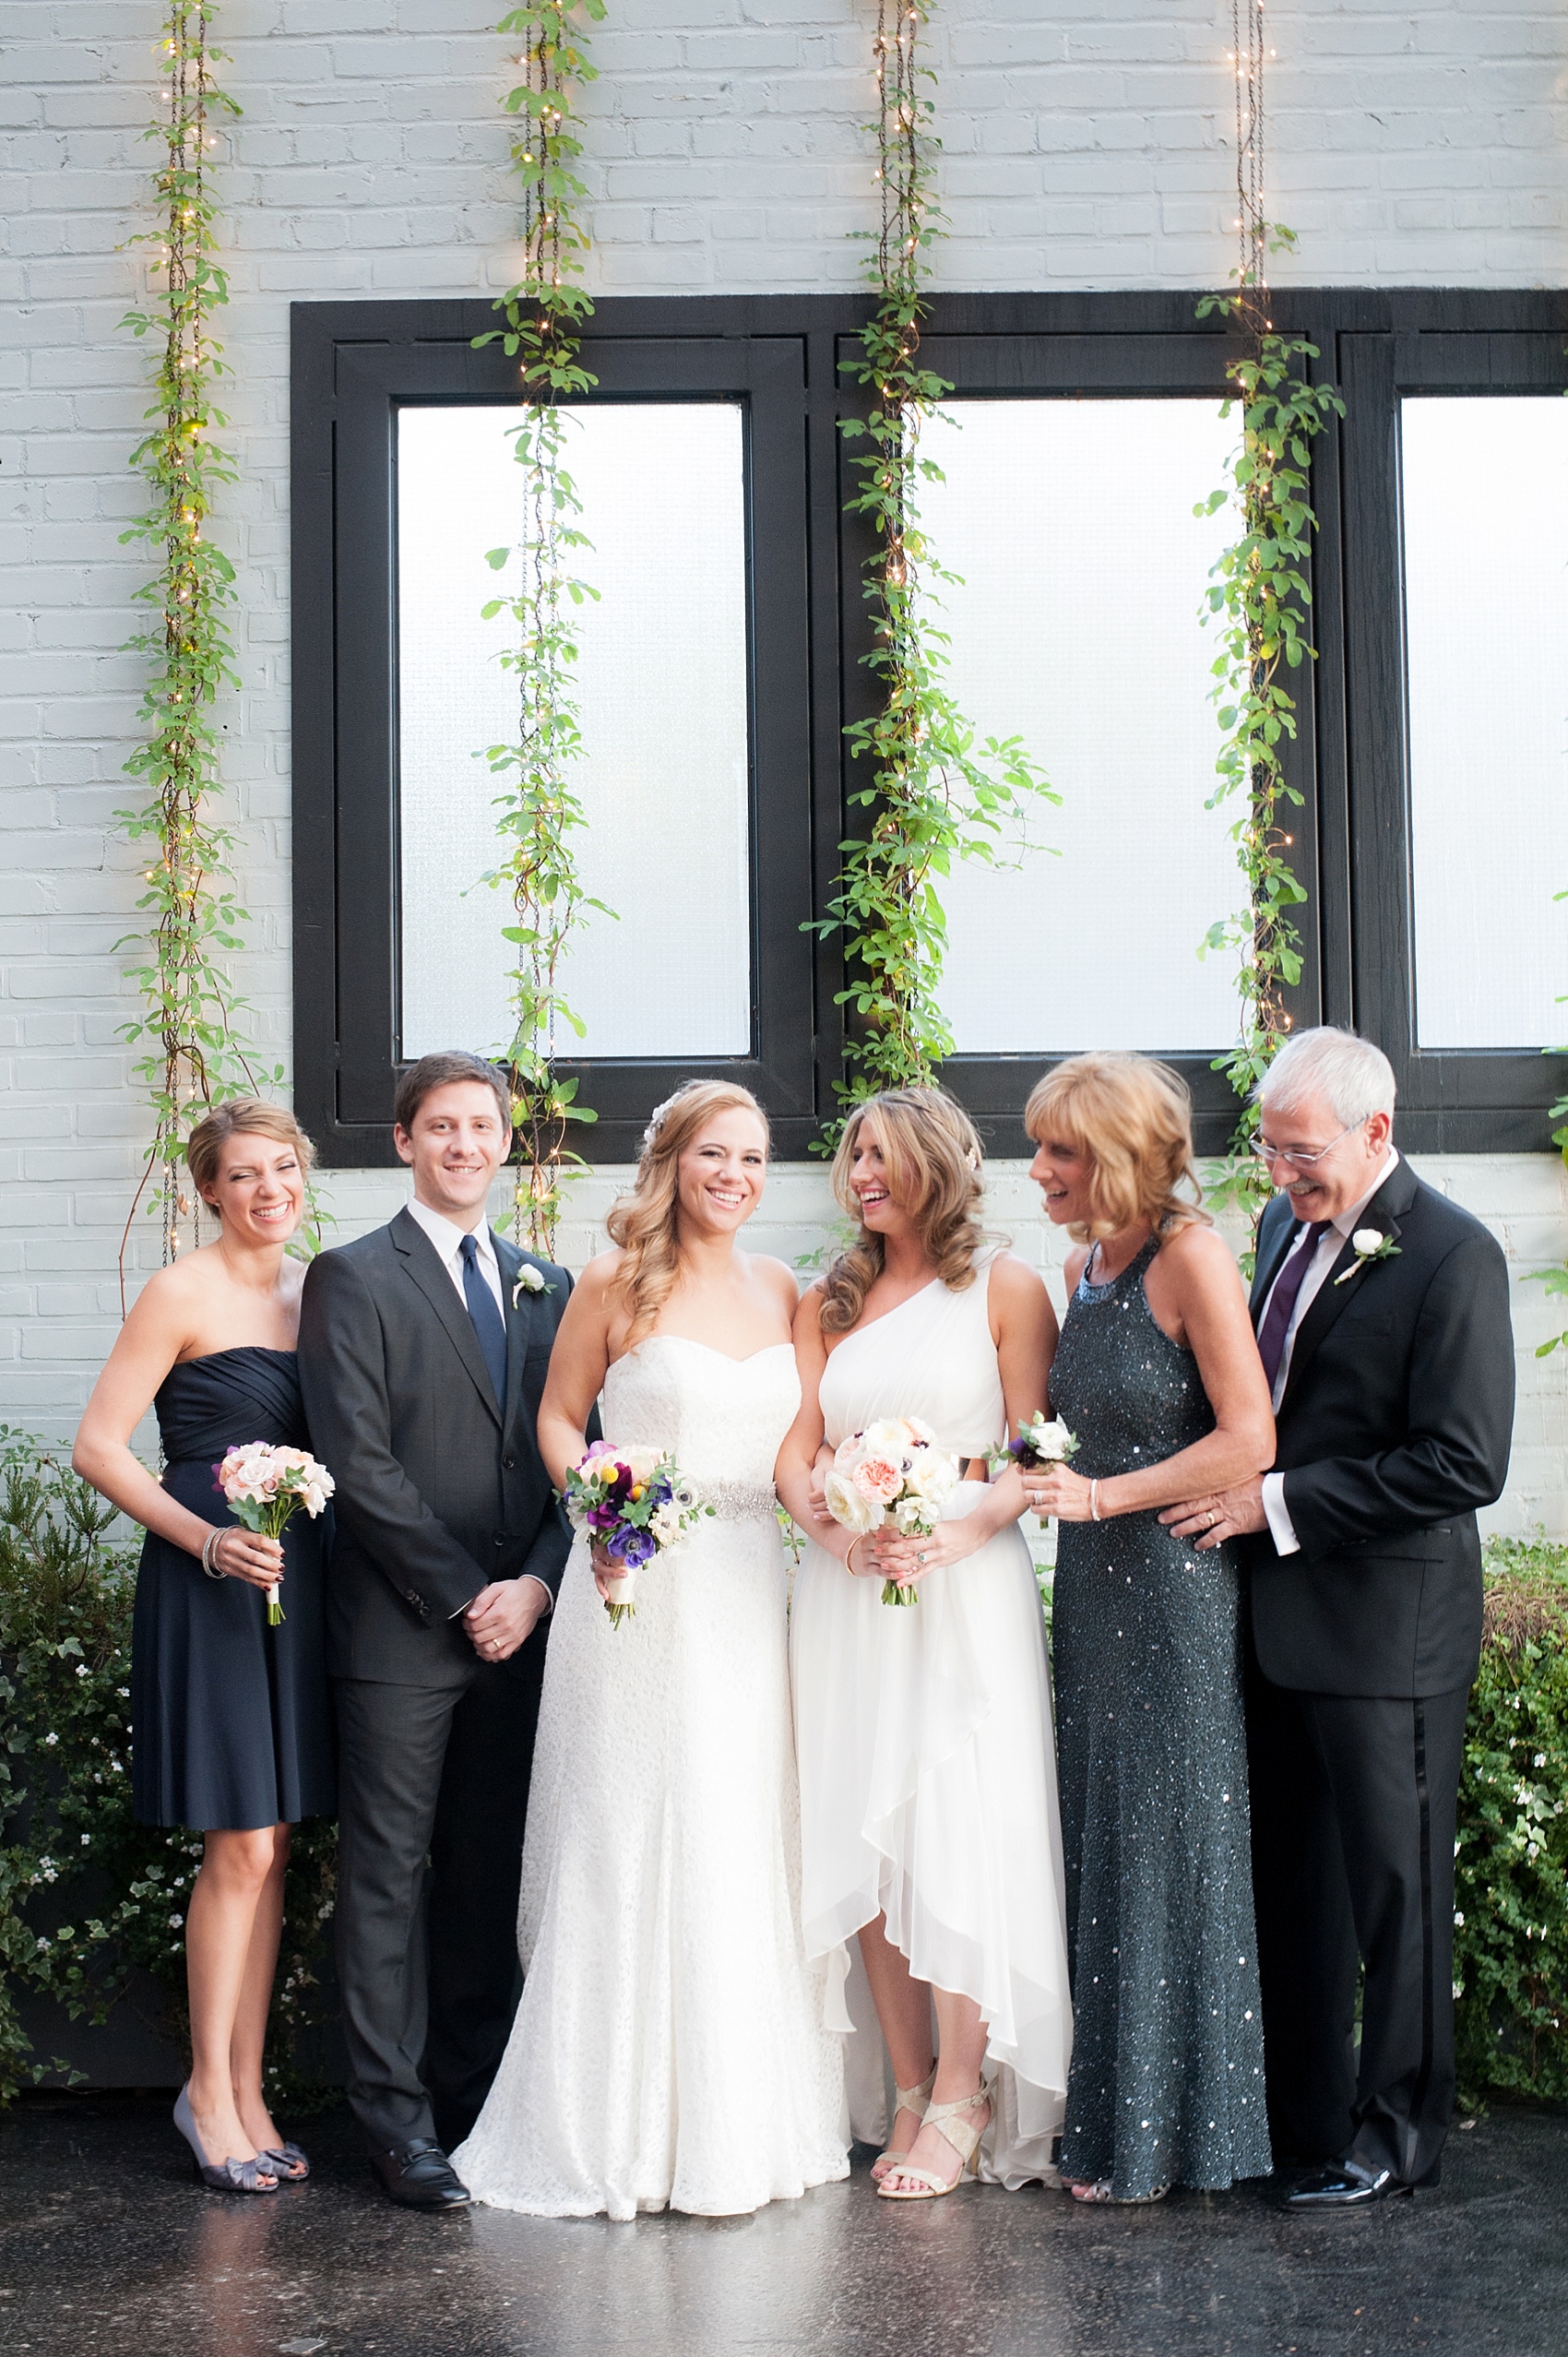 Wedding gowns by Jenny Yoo and Henry Roth, flowers by Foxglove and navy Ann Taylor bridesmaid dress in navy for a lesbian wedding at 501 Union, Brooklyn, NY. Photography by Mikkel Paige, NYC wedding photographer.